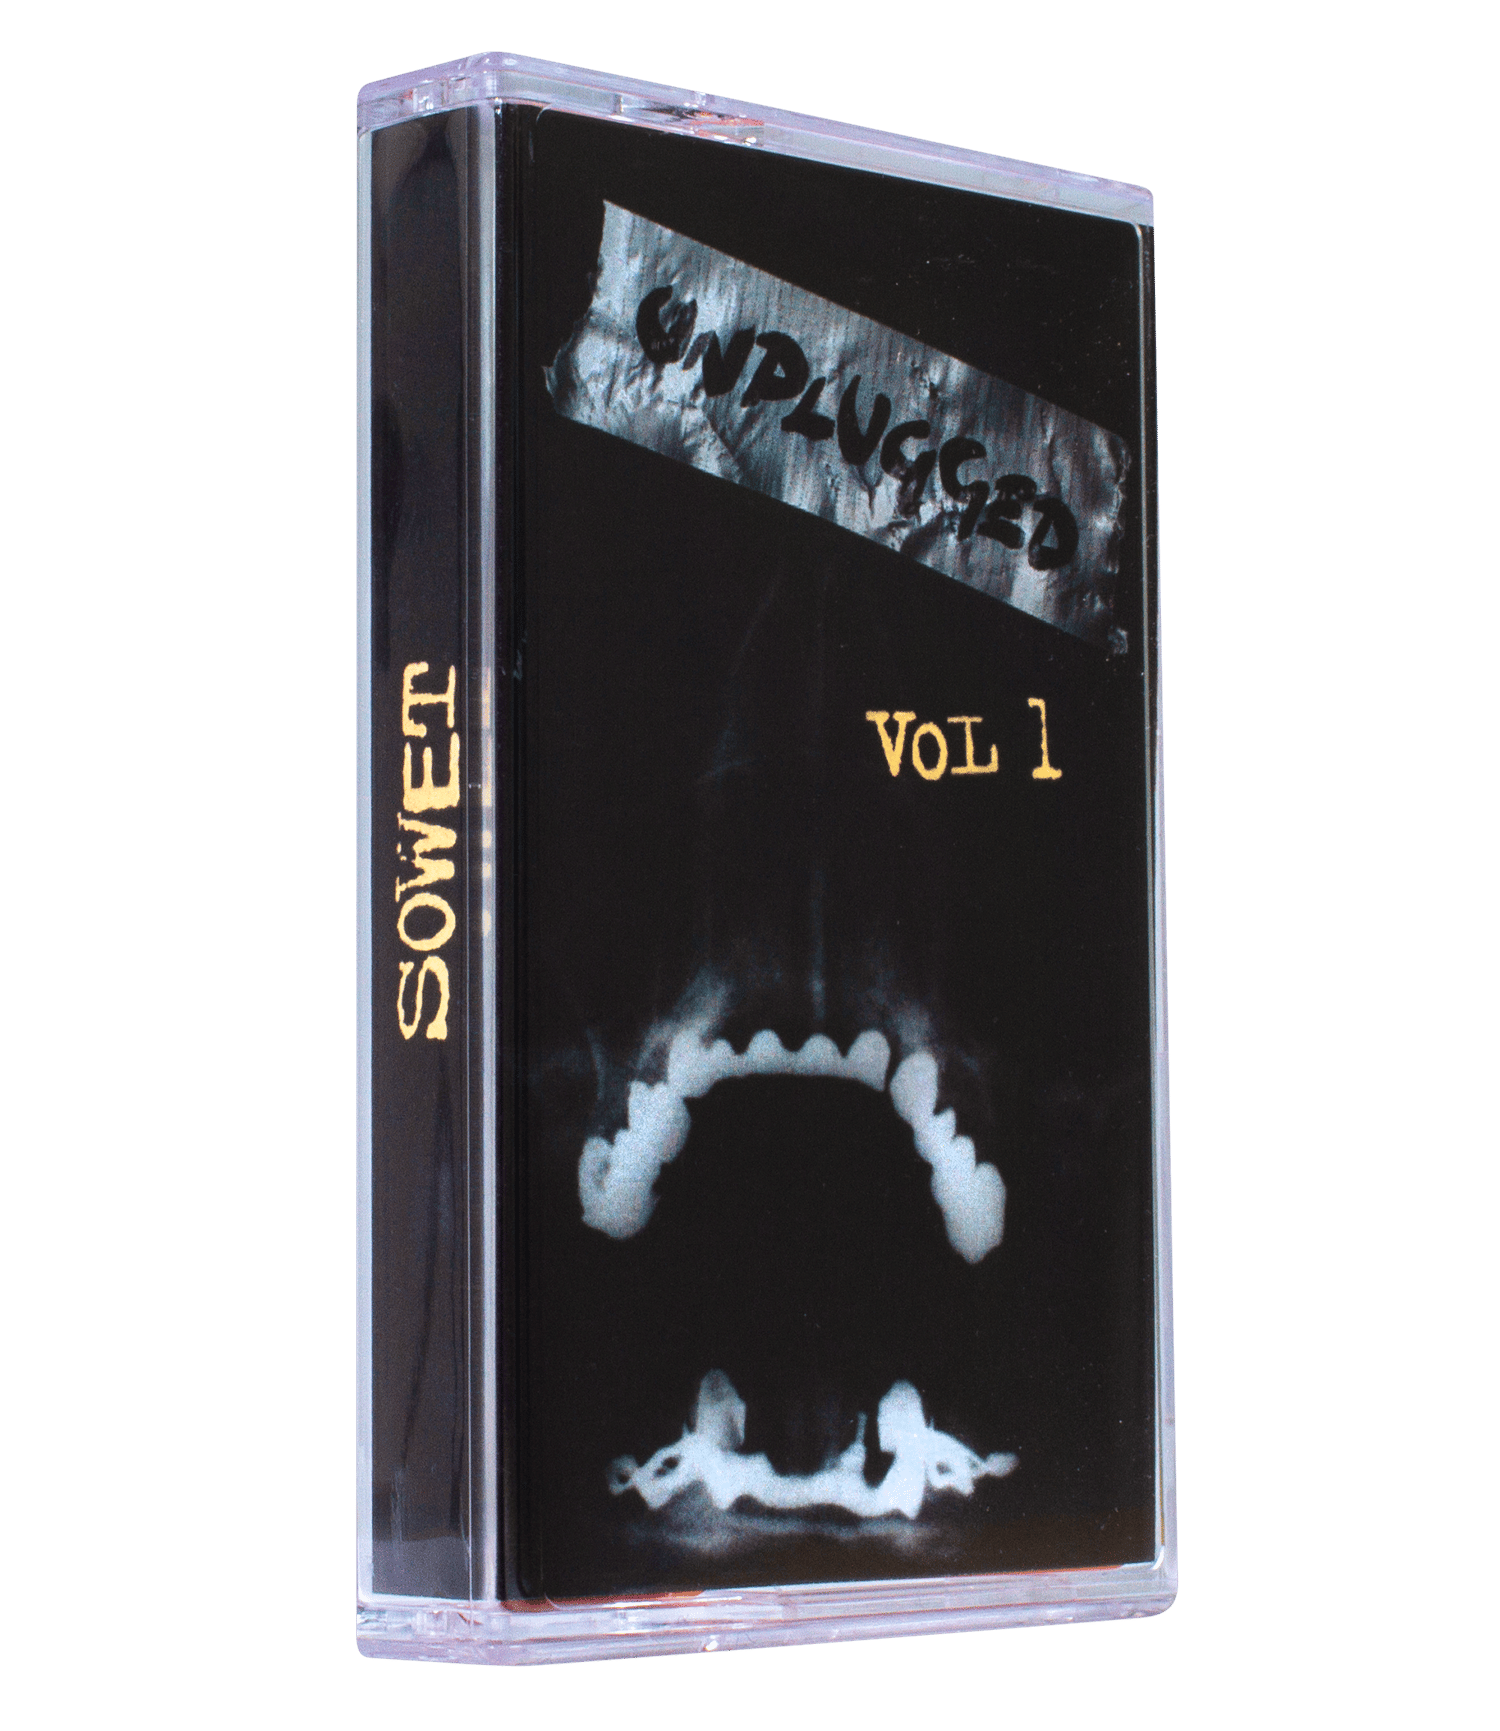 Image of UNPLUGGED VOL 1 CASSETTE TAPE